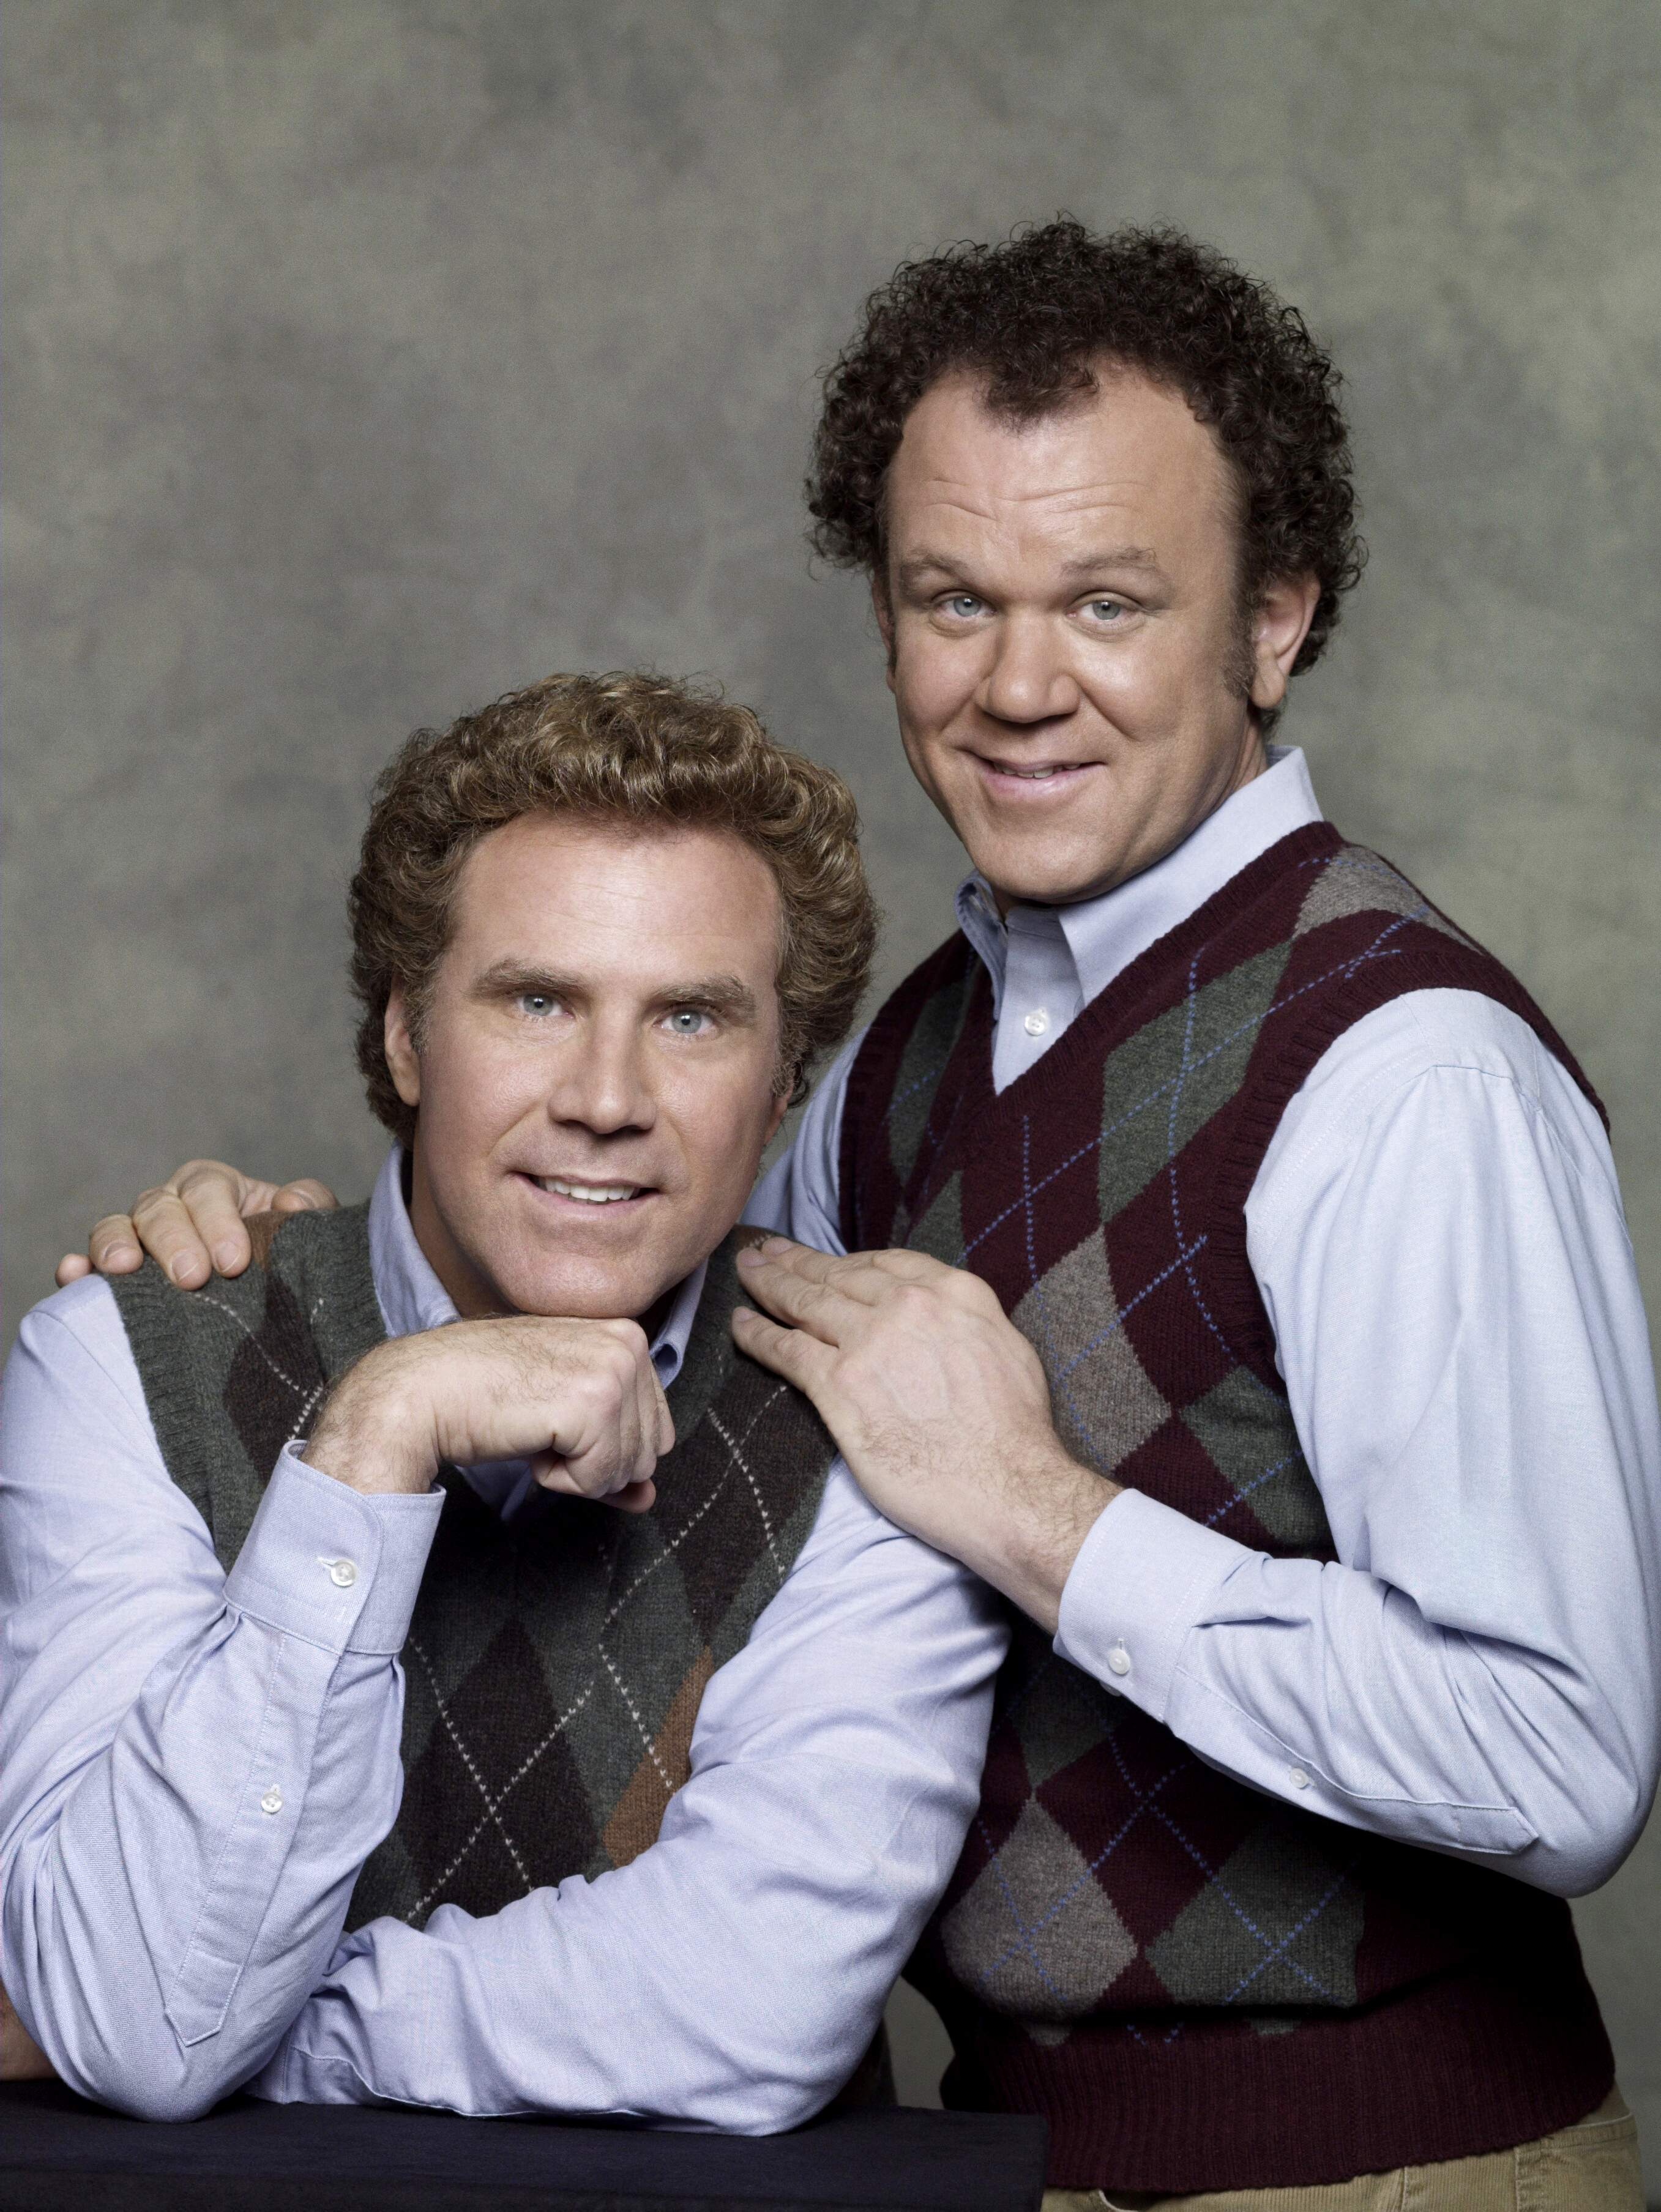 Will Ferrell (left) and John C. Reilly star in Columbia Pictures' comedy STEP BROTHERS.